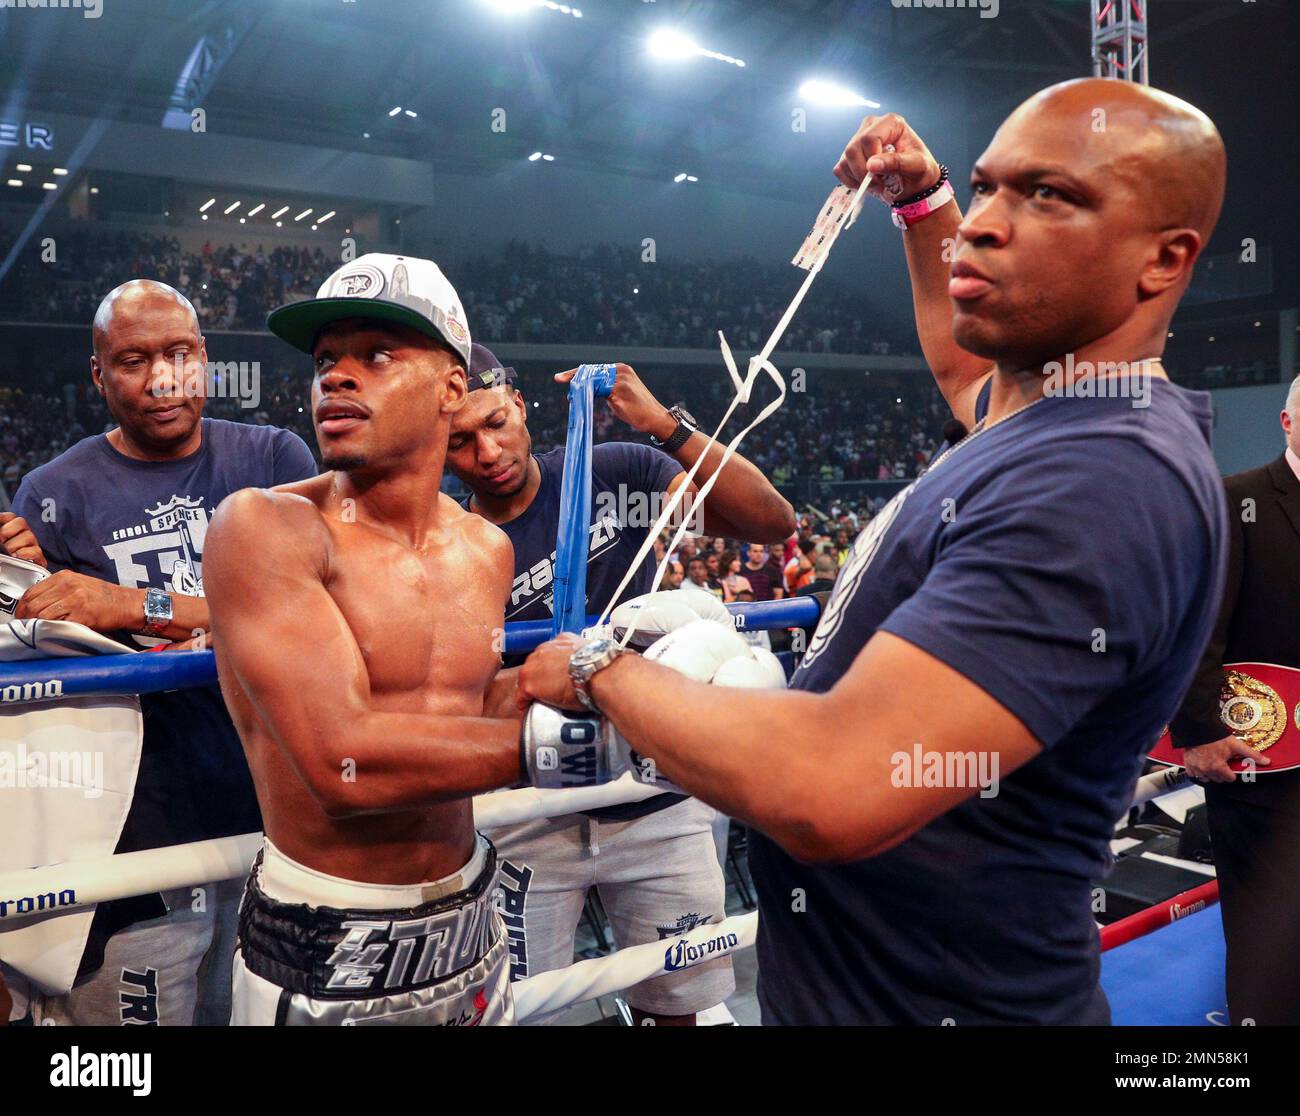 L-r) Errol Spence Jr and trainer Derrick James watch a replay of the fight after Specne knocked out Carlos Ocampo in the first round of an IBF welterweight title fight Saturday, June